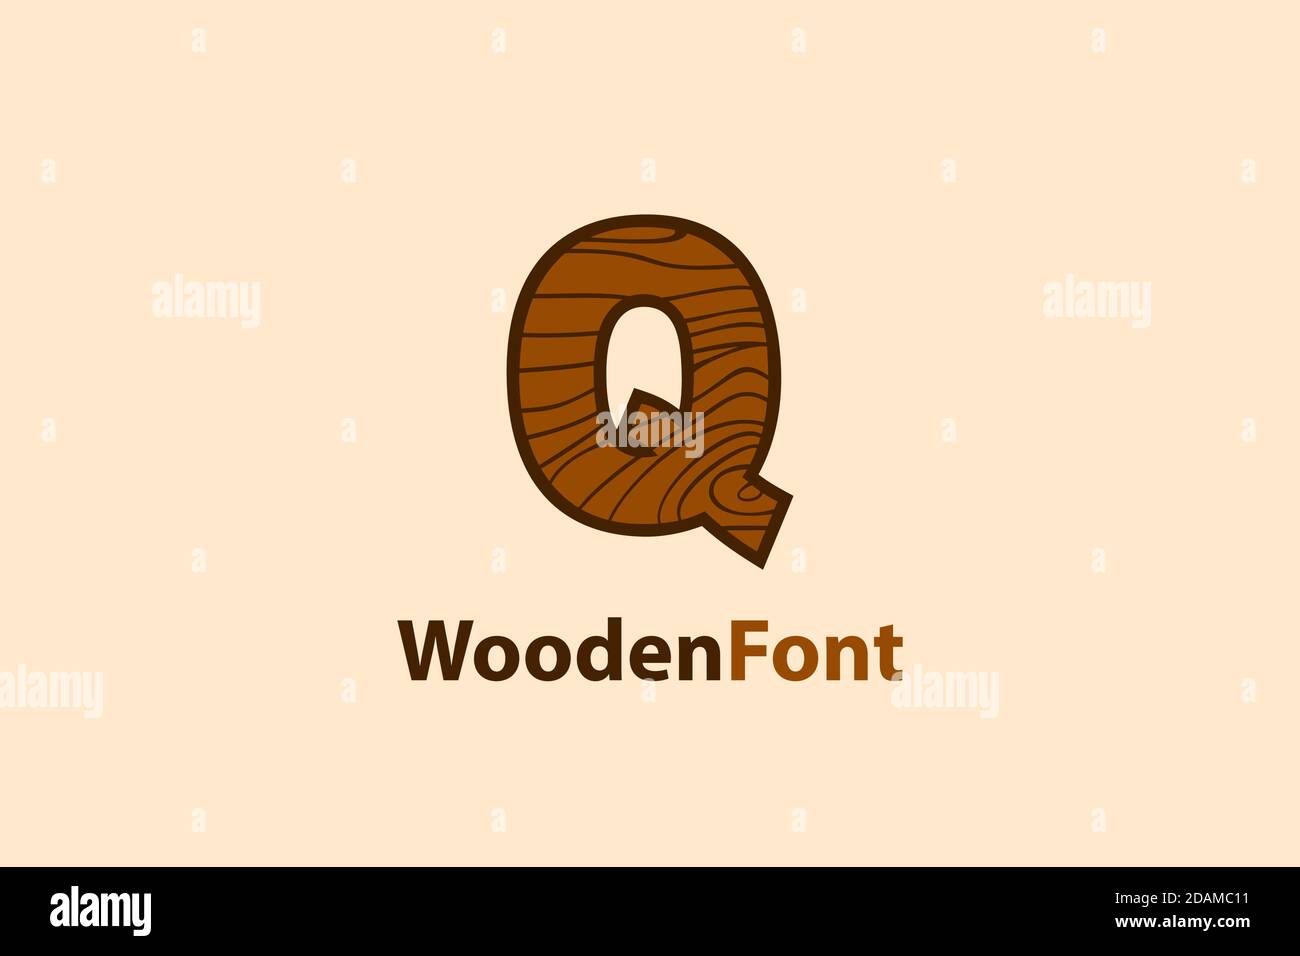 Abstract letter Q logo with wood grain texture design concept. modern and creative logo design. Stock Vector